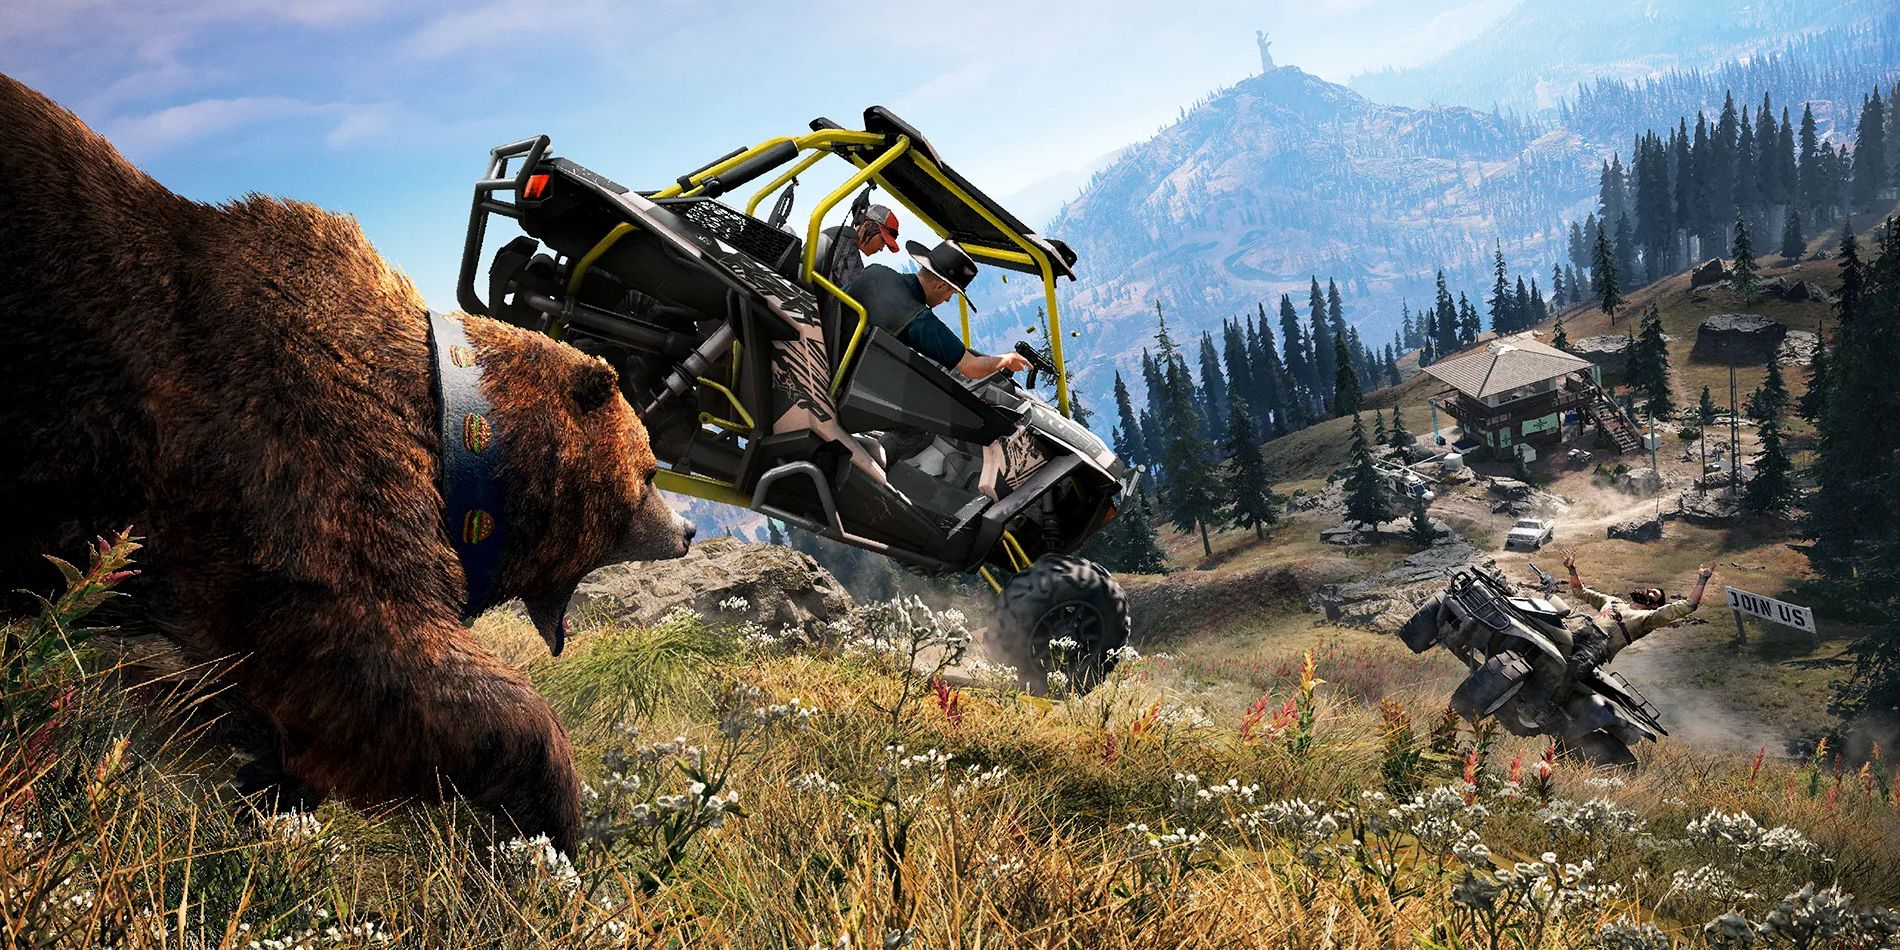 Xbox One X allows for Far Cry 5 to run at native 4K